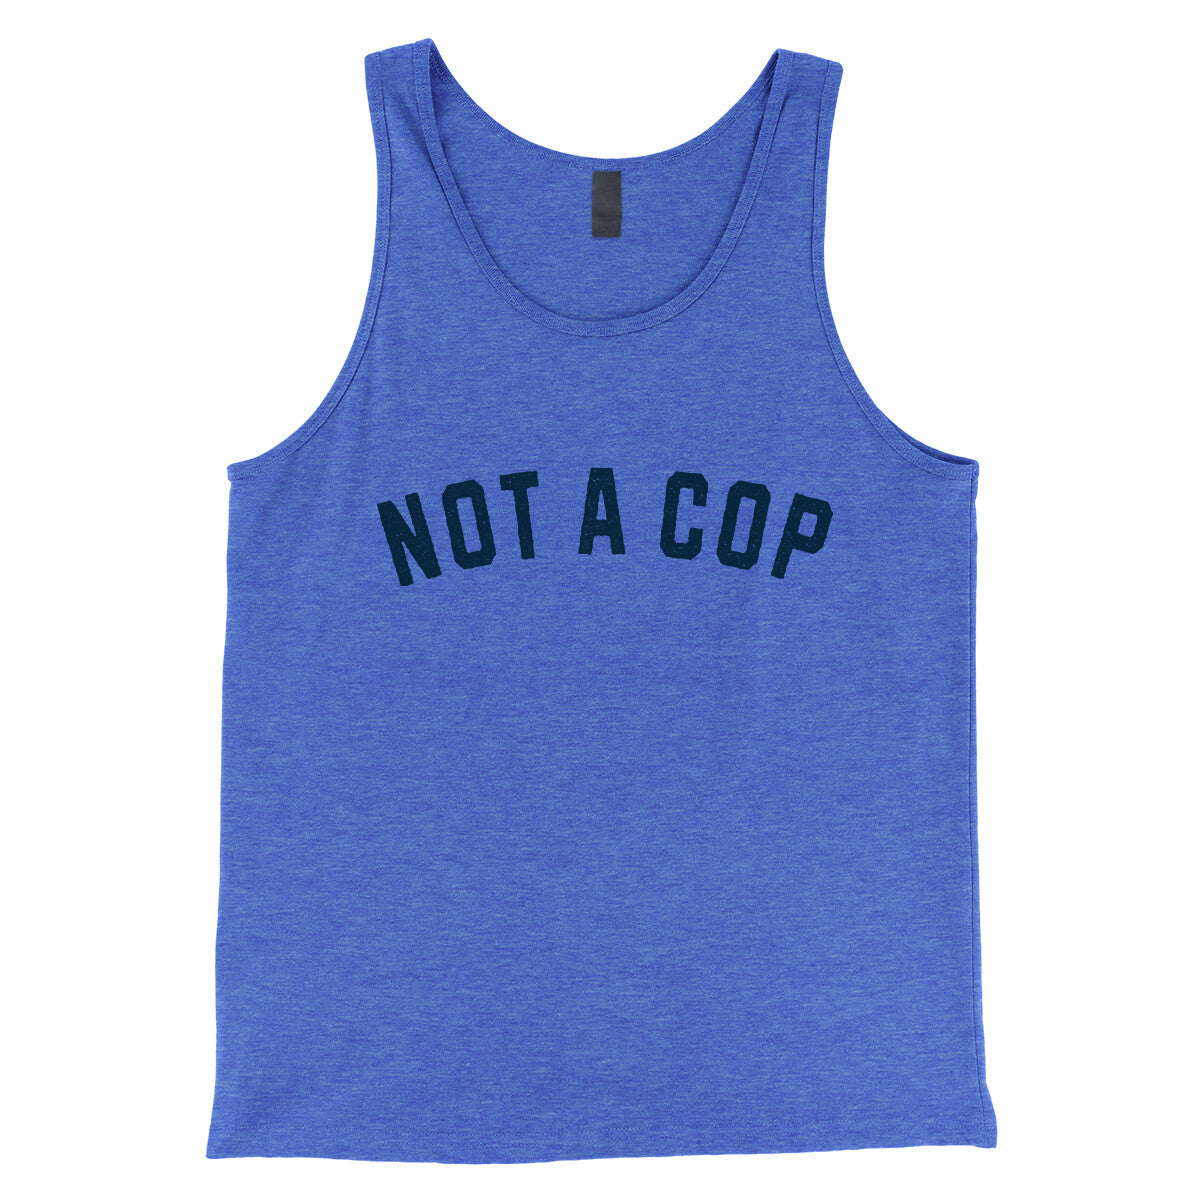 Not a Cop in True Royal TriBlend Color